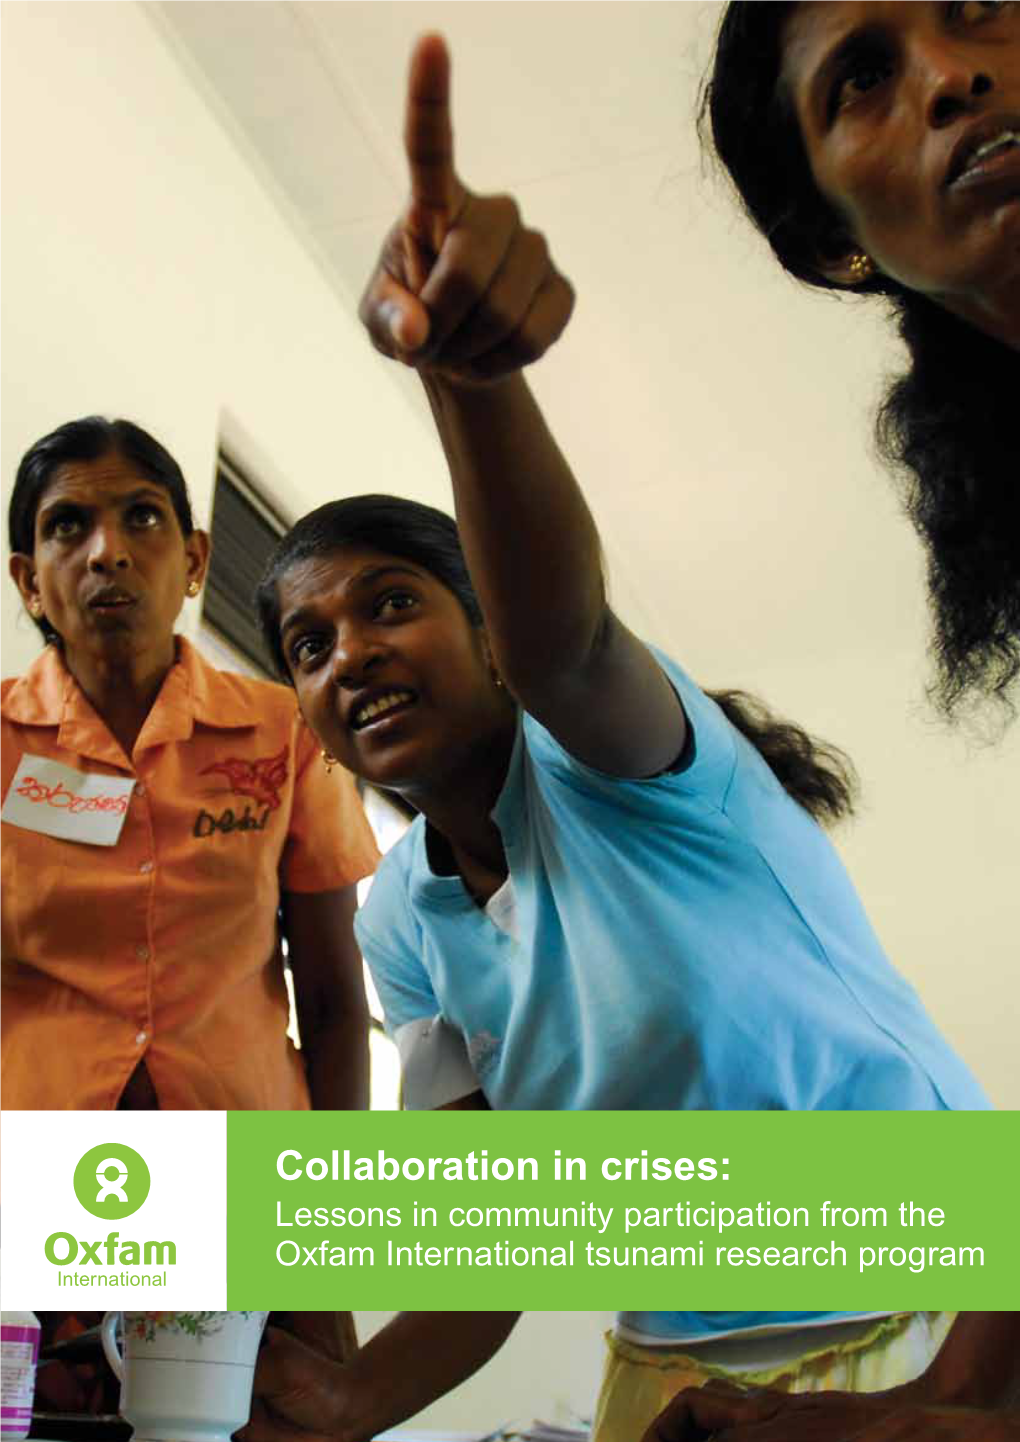 Collaboration in Crises: Lessons in Community Participation from the Oxfam International Tsunami Research Program